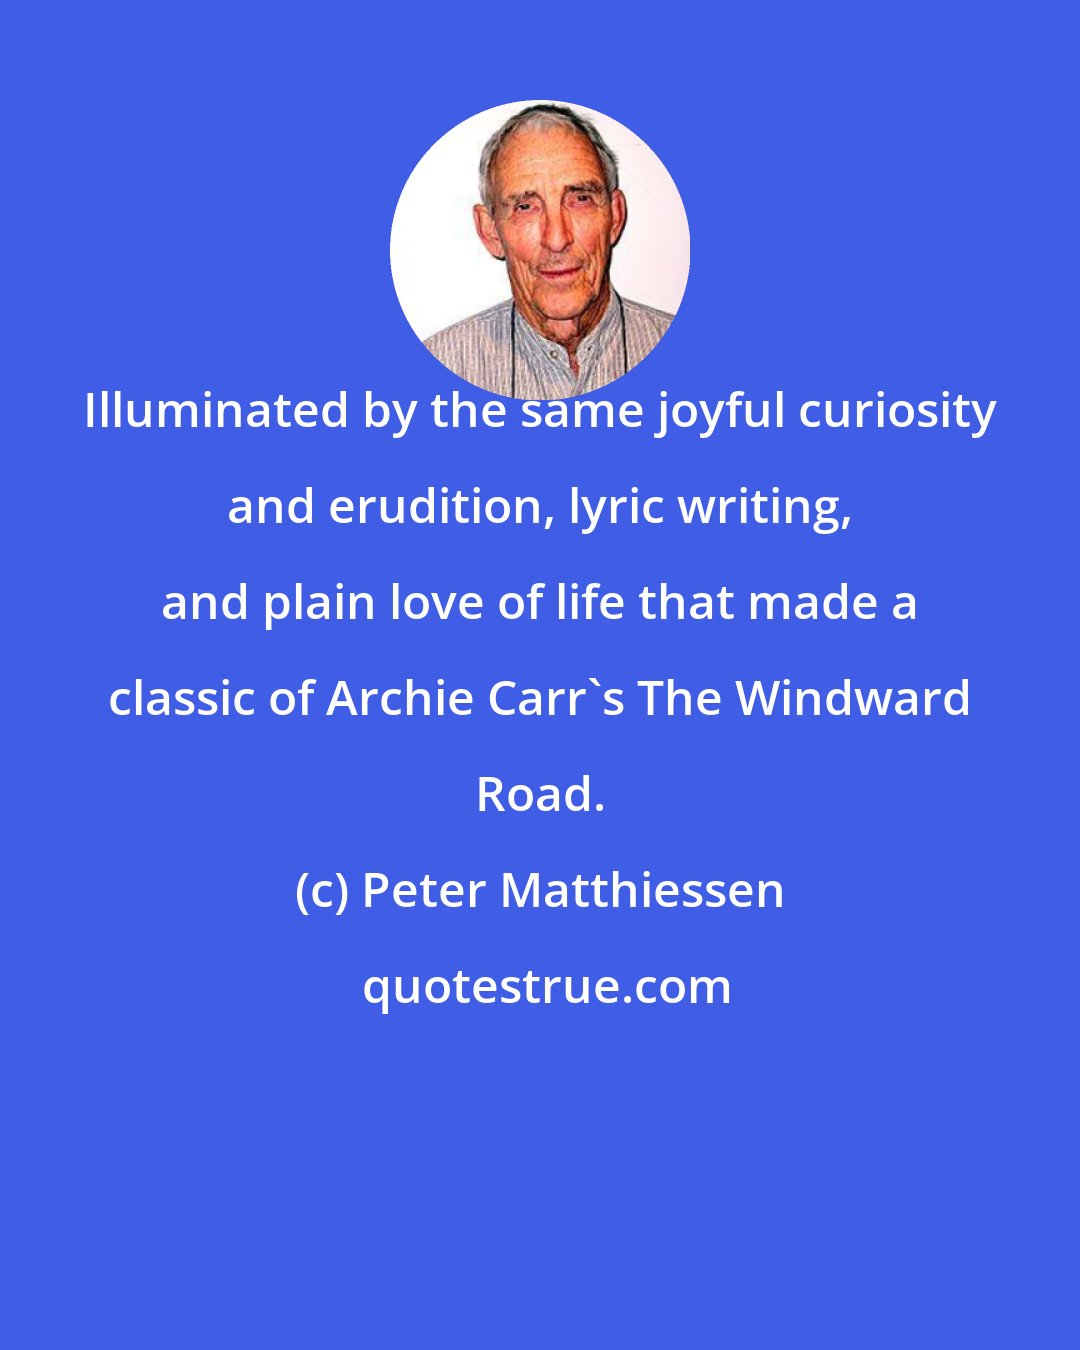 Peter Matthiessen: Illuminated by the same joyful curiosity and erudition, lyric writing, and plain love of life that made a classic of Archie Carr's The Windward Road.